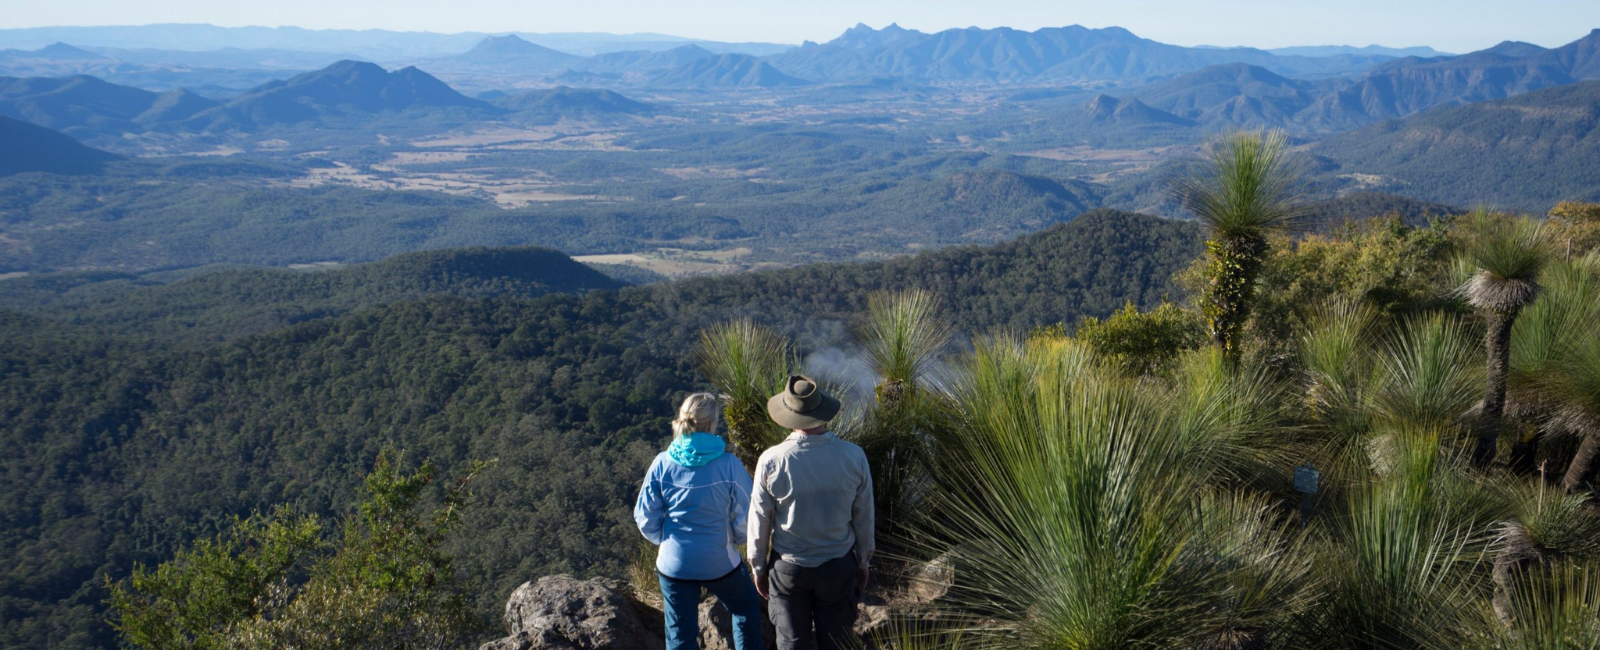 Two people standing on the top of Spicers Peak